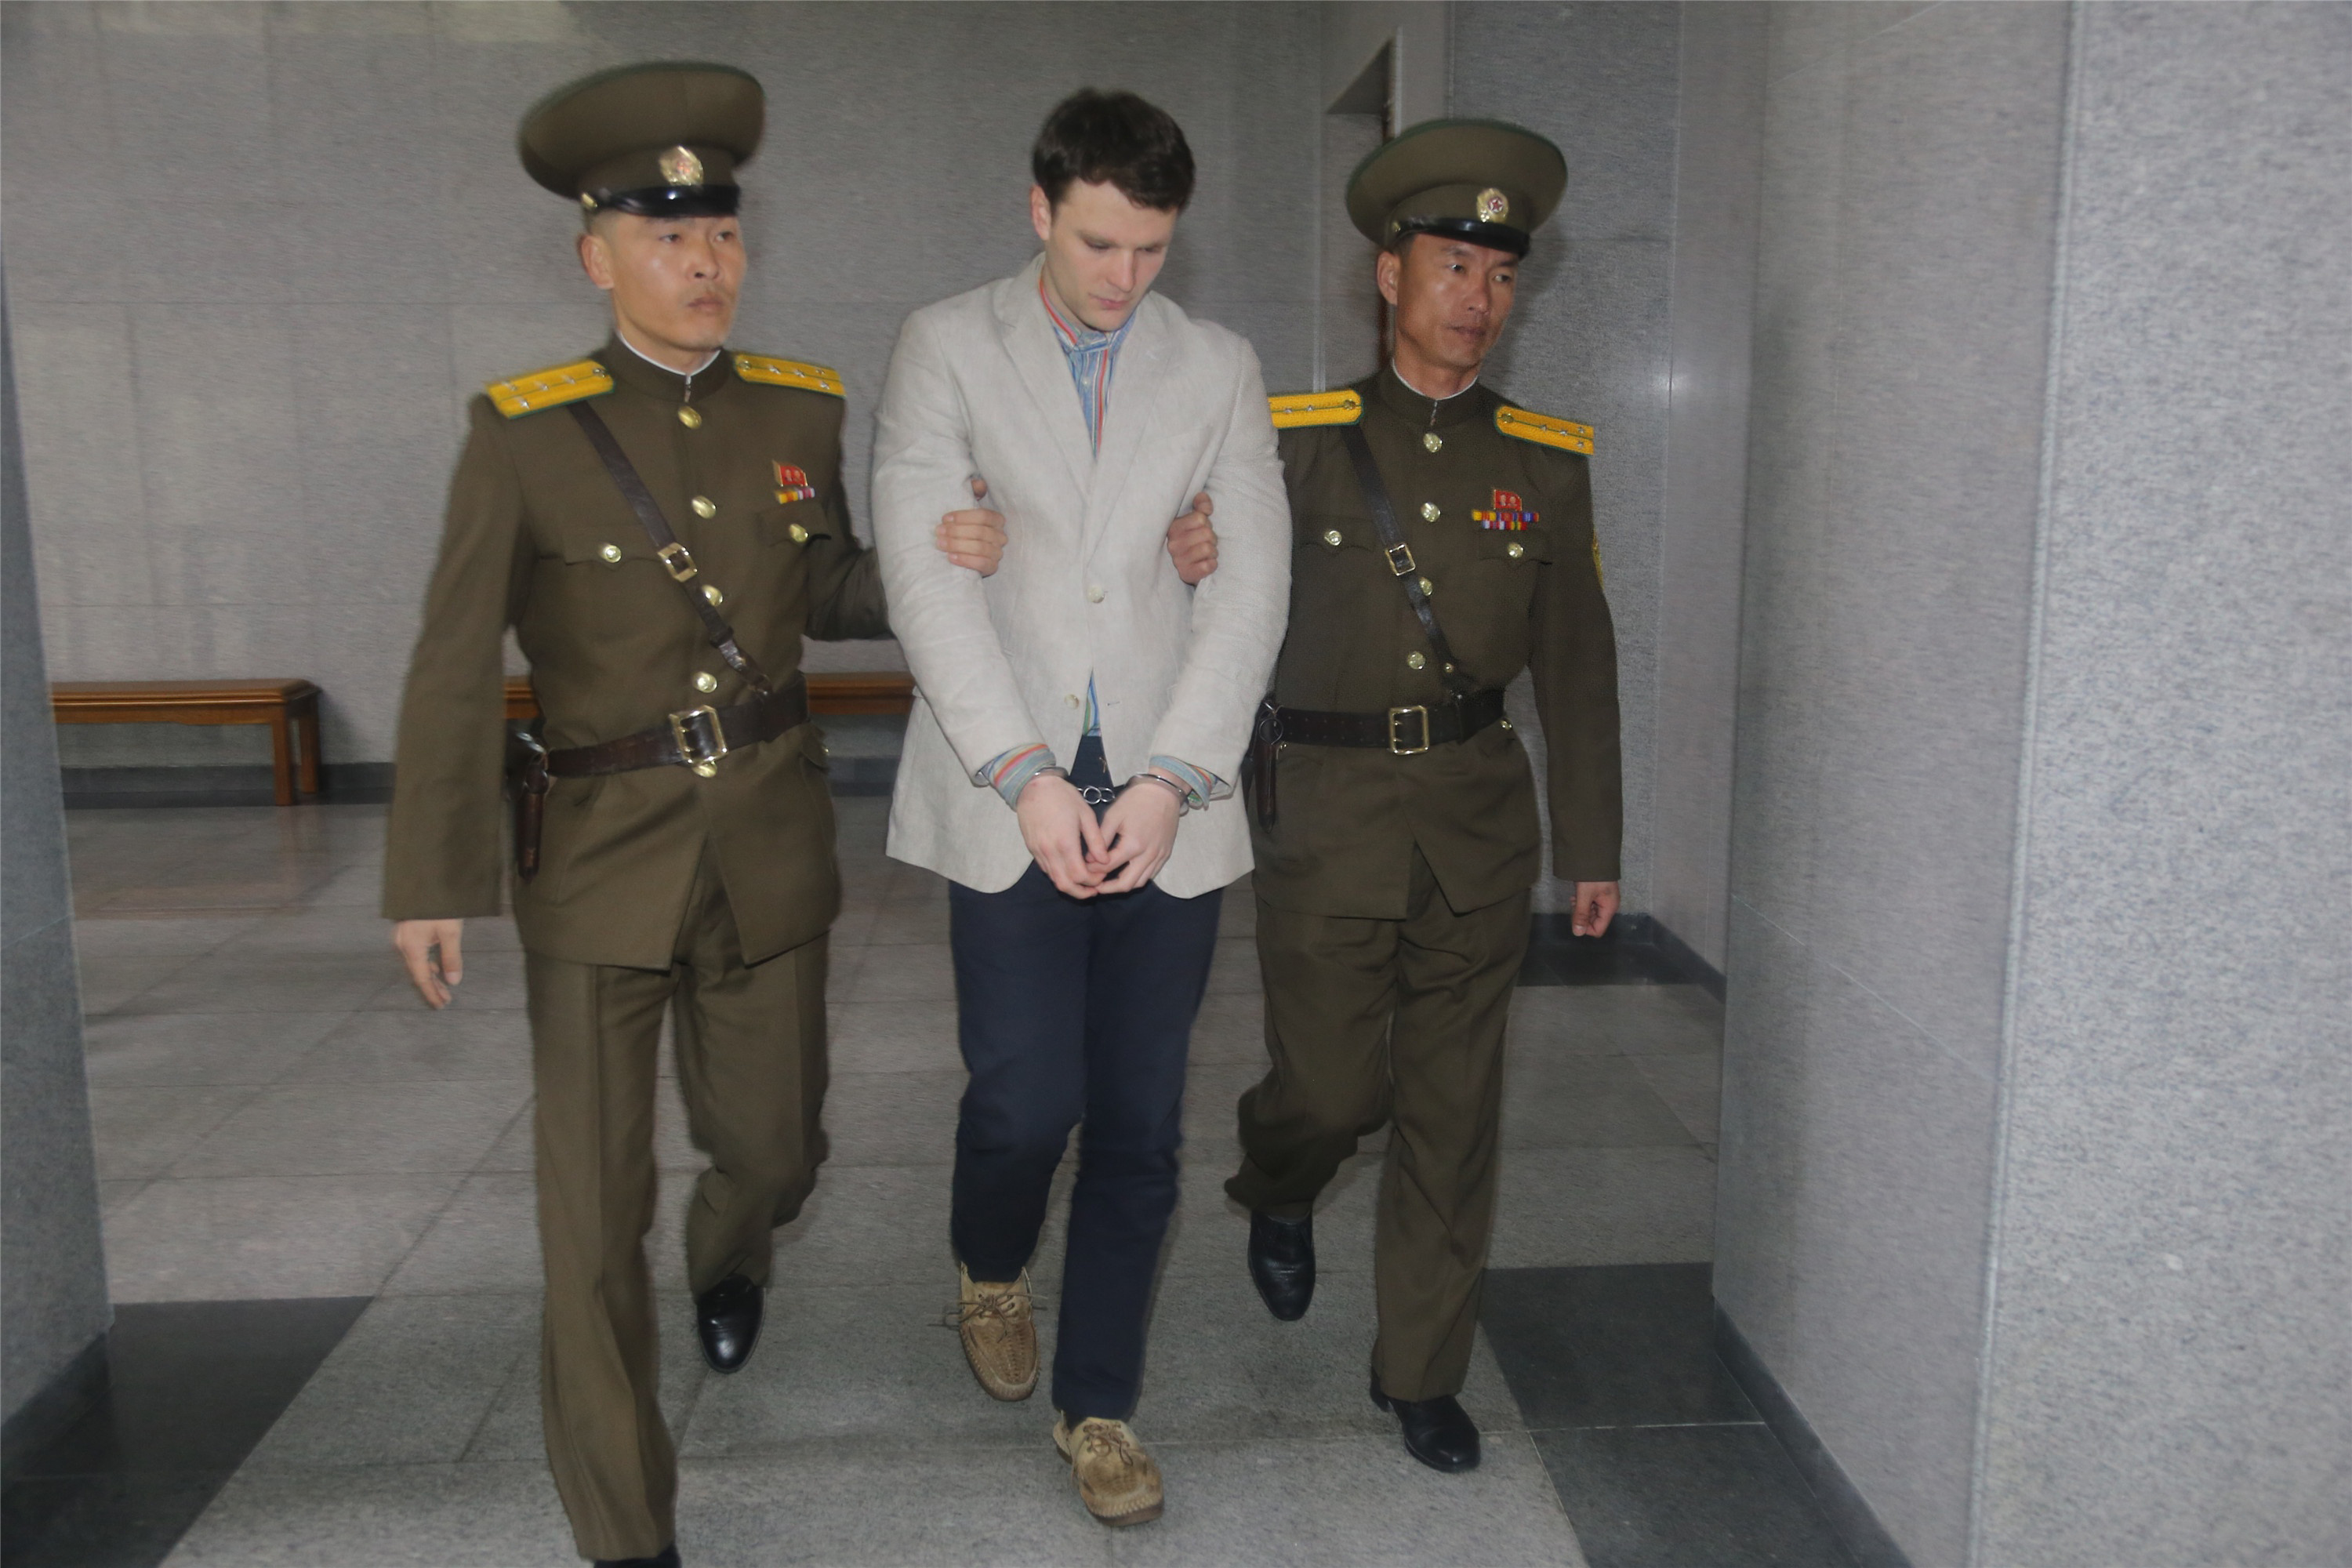 American student Otto Frederick Warmbier, center, arrives at a court for his trial in Pyongyang on March 16, 2016. (Lu Rui—Xinhua News Agency/Getty Images)